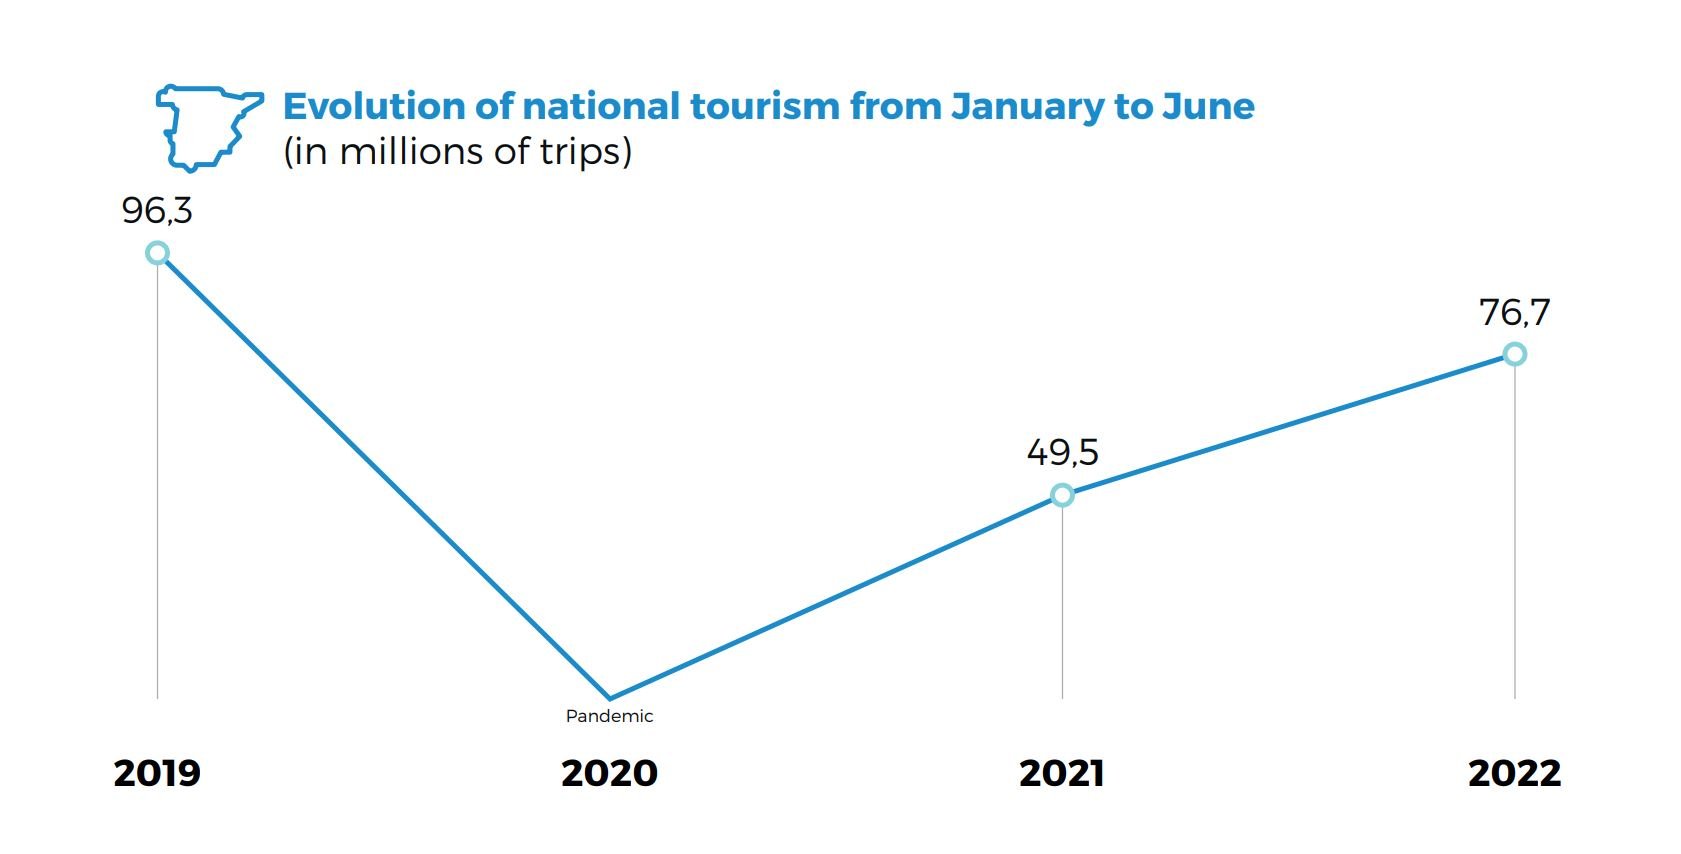 evolution of national tourism in spain 2019 2022